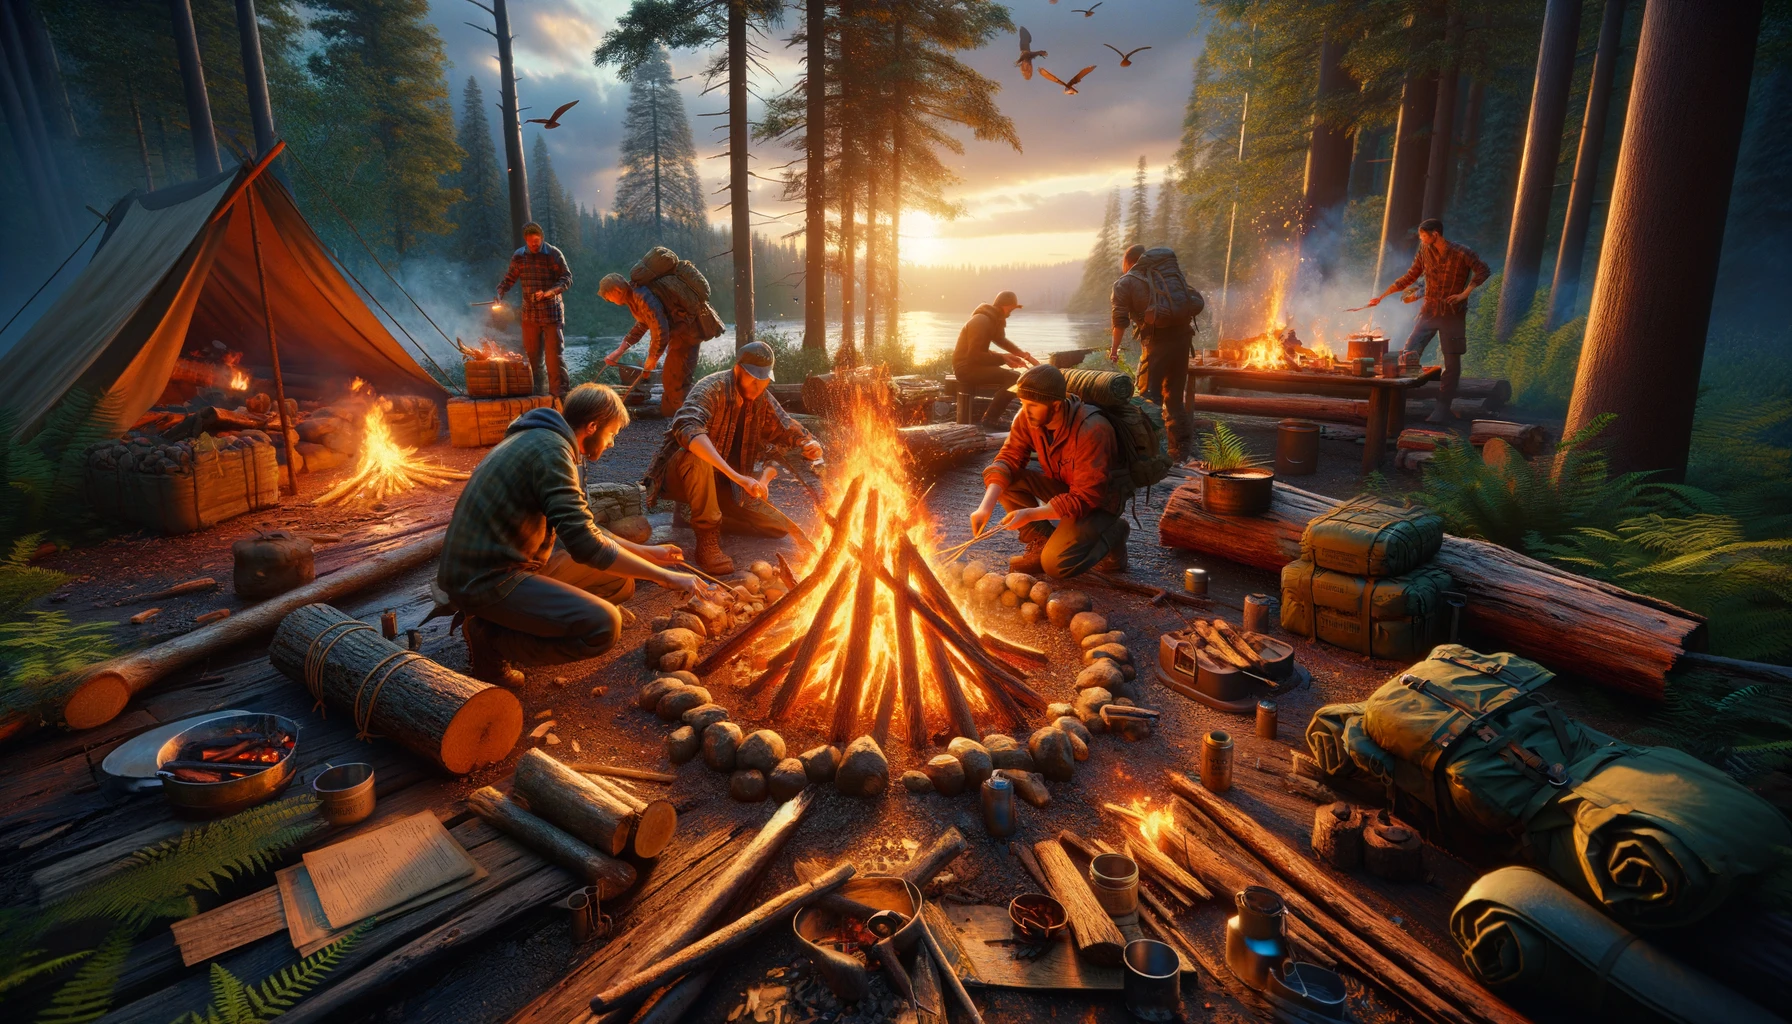 A realistic depiction of individuals building and managing a campfire in the wilderness, showcasing gathering and preparing firewood, lighting the fire with traditional and modern methods, and using the fire for cooking, warmth, and signaling. The image captures the essential skills of fire creation and management against the backdrop of an evening sky, highlighting the importance of fire in survival scenarios